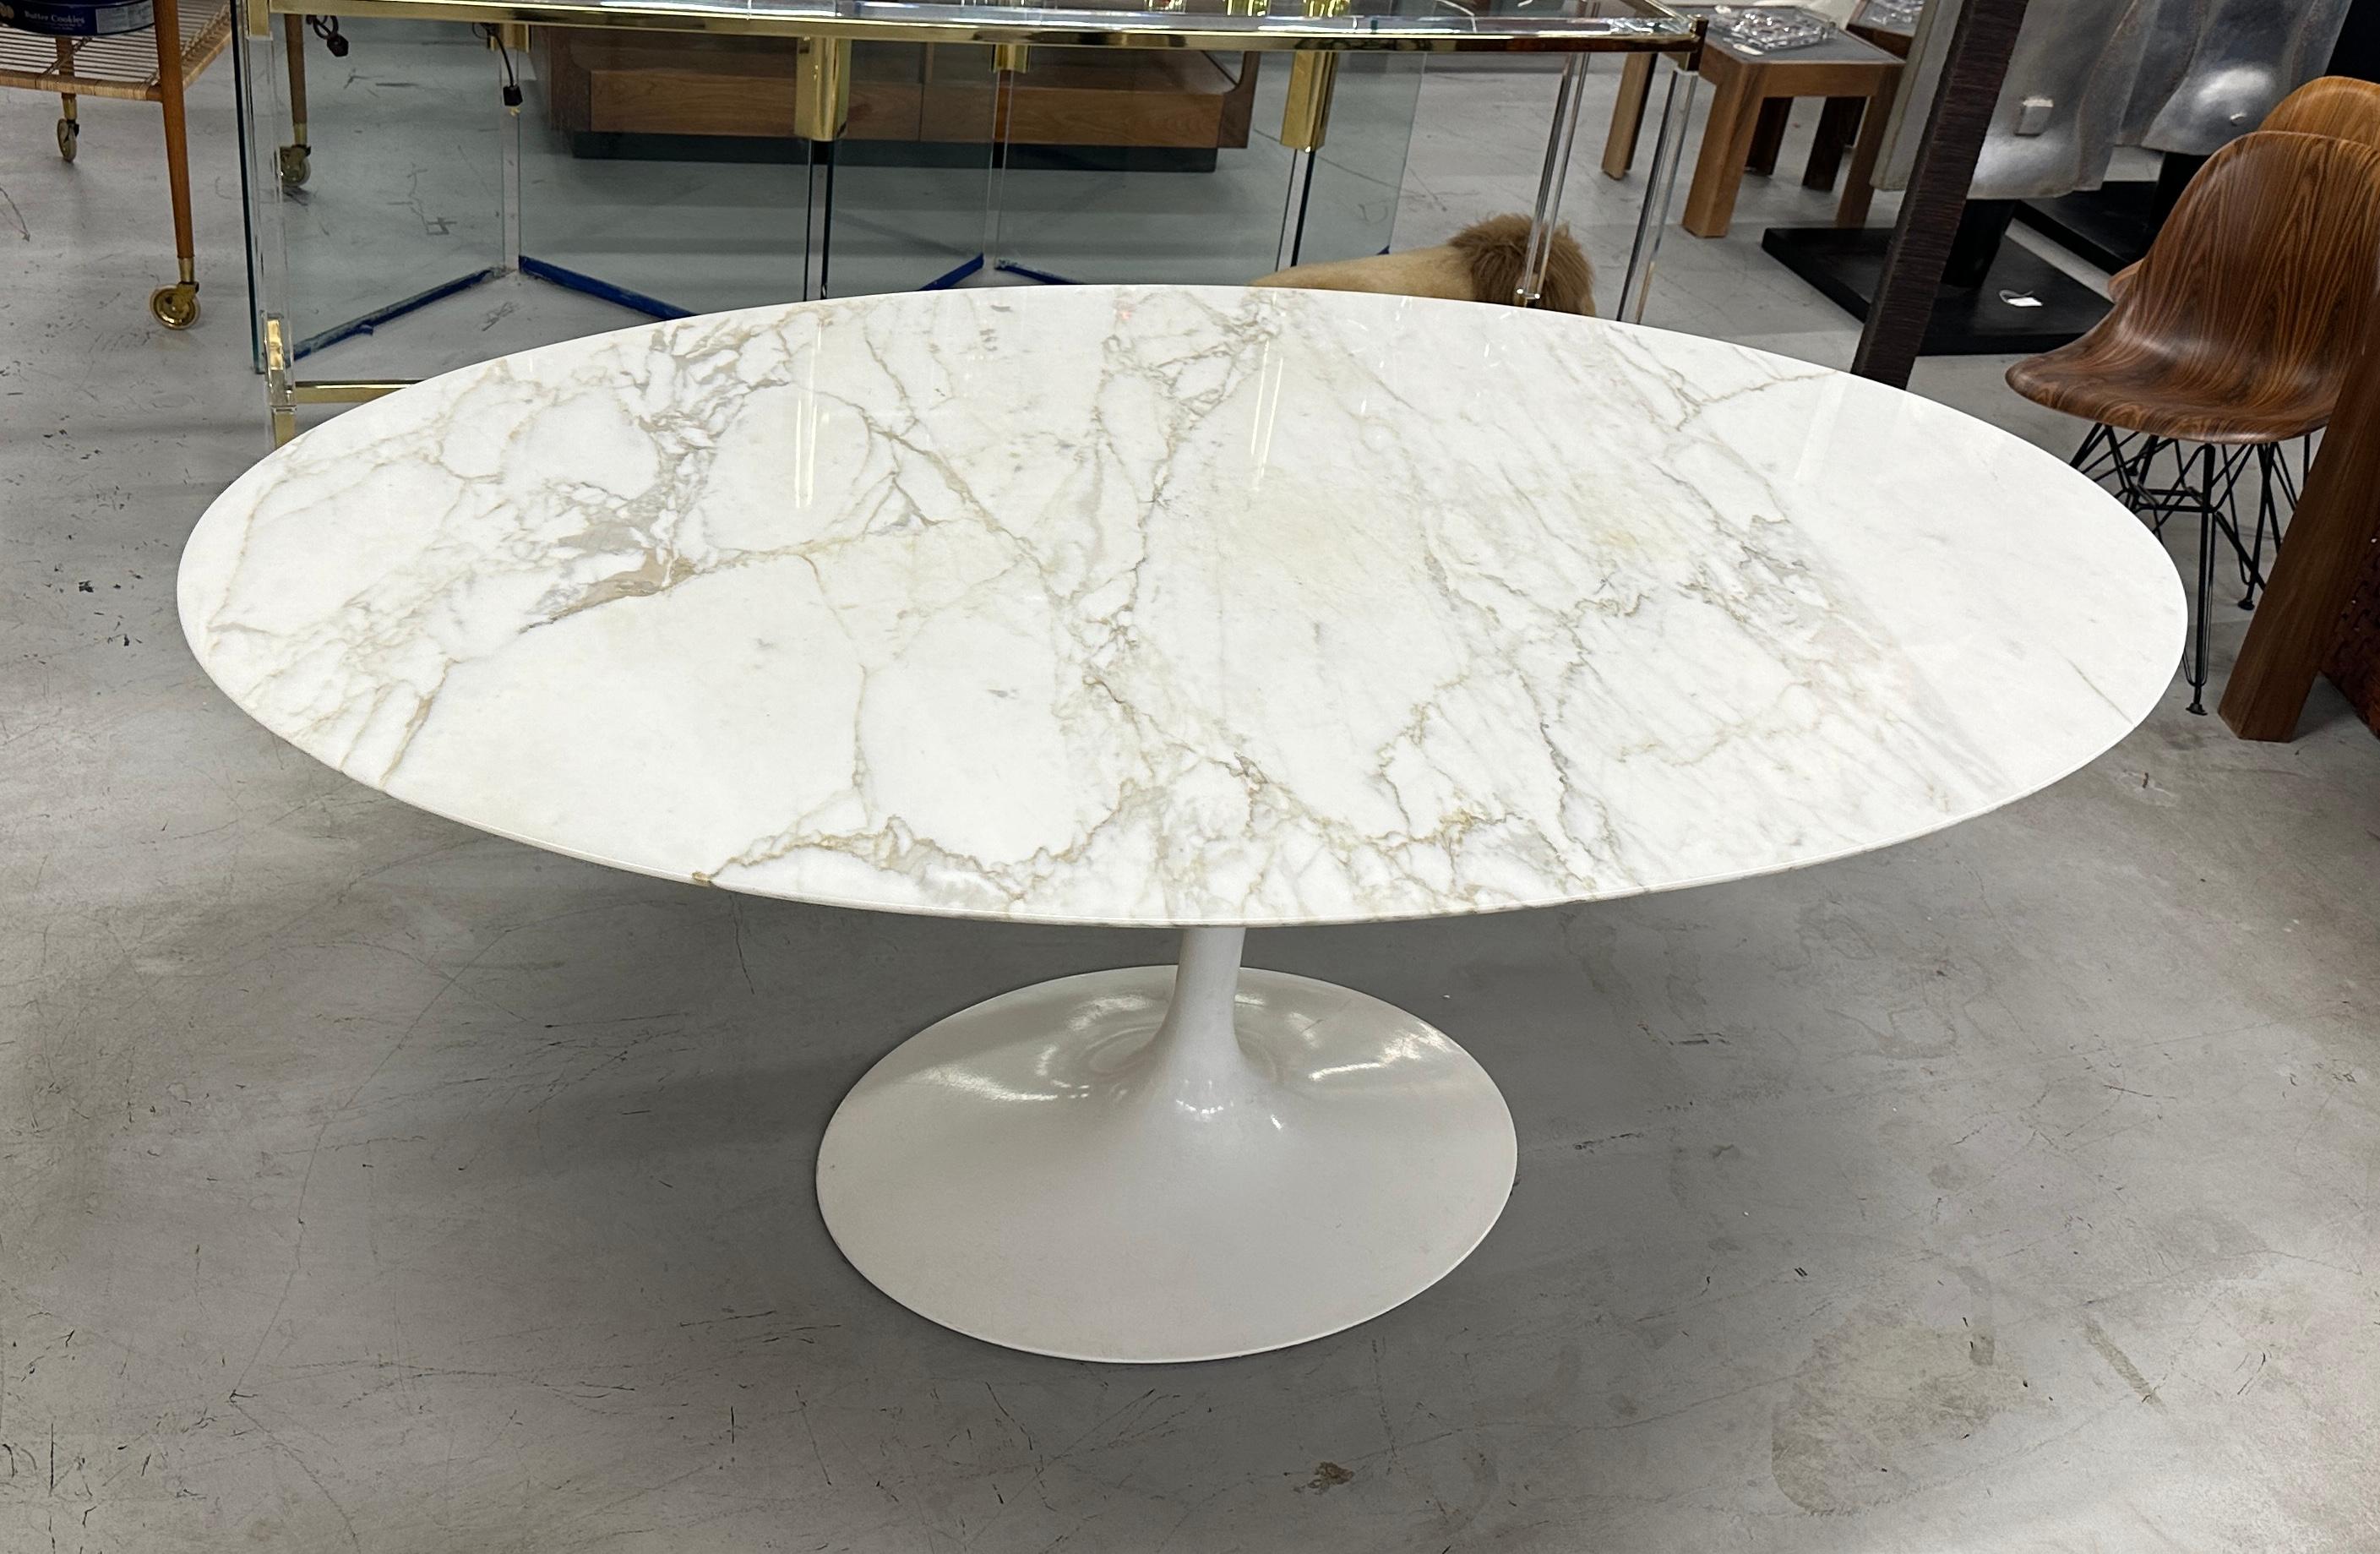 A stunning marble top 78 inch oval Saarinen Tulip table by Knoll. We purchased 2 1960's era 78 inch table's with only one vintage base. We managed to find a 1990's era Genuine Knoll base and mated it to this top. A 100% genuine Knoll table with a